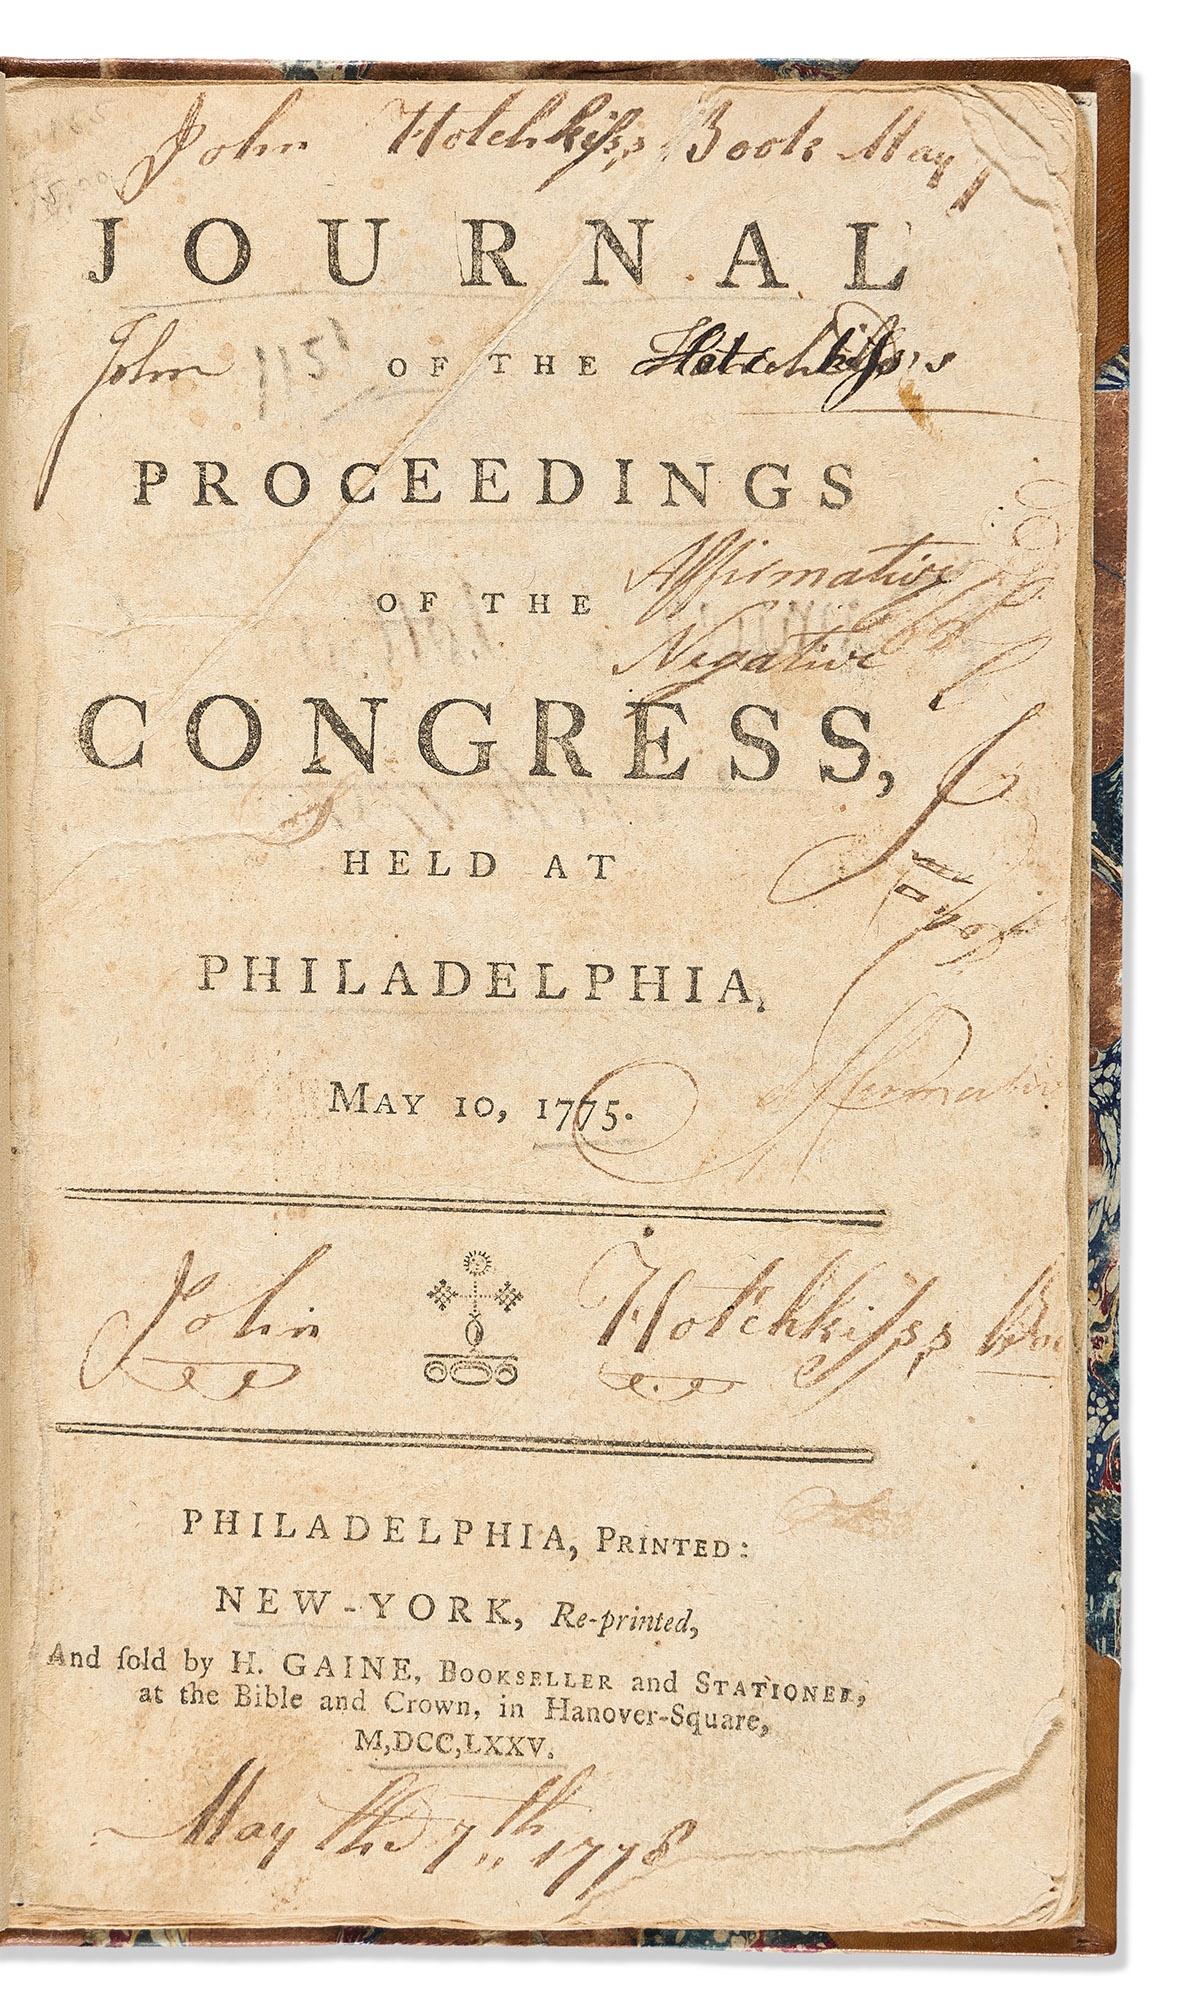 (AMERICAN REVOLUTION--1775.) Journal of the Proceedings of the Congress Held at Philadelphia, May 10, 1775.